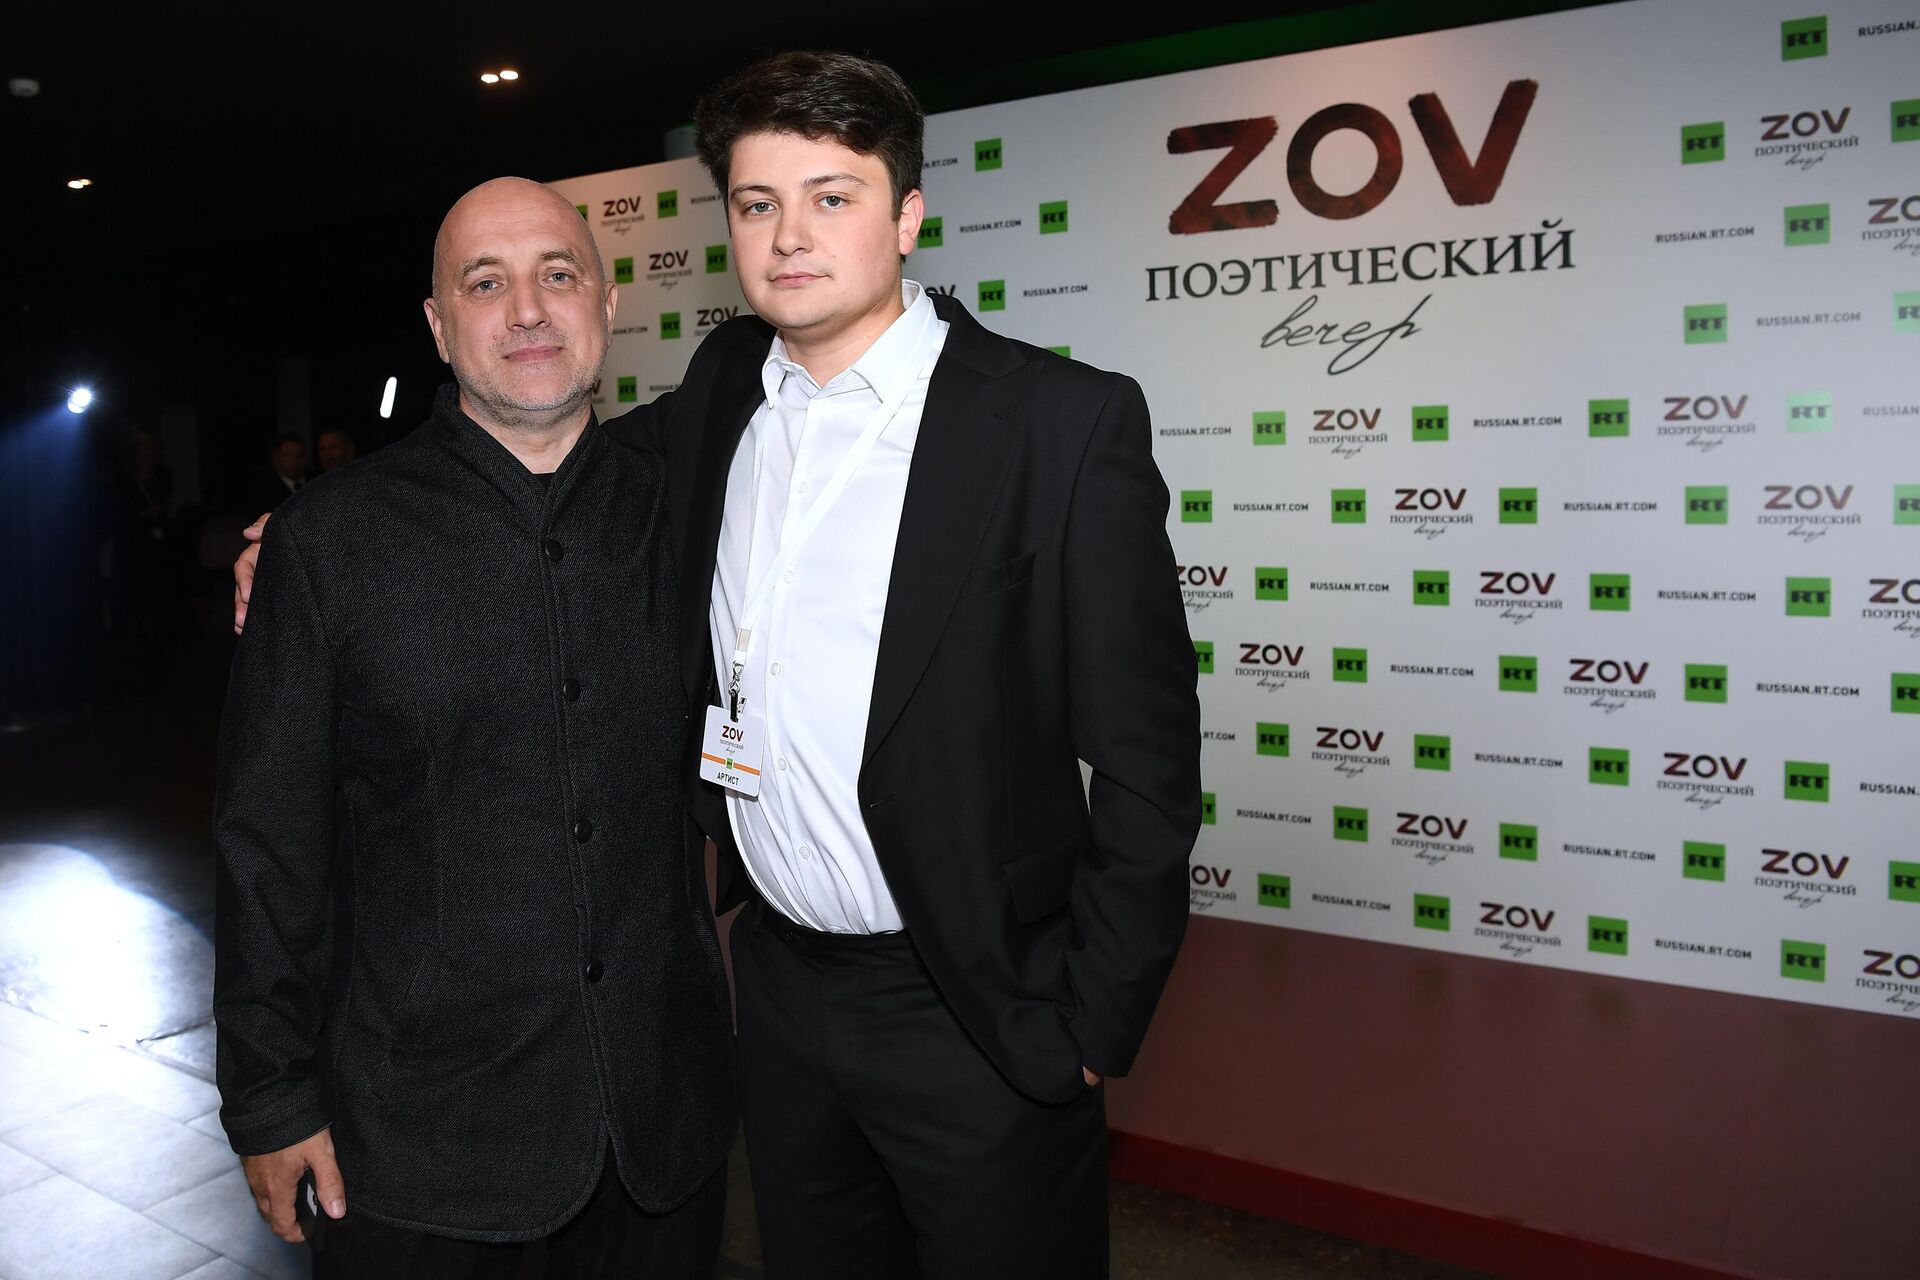 Author, co-chairman of Just Russia - For Truth party Zakhar Prilepin and violinist Pyotr Lundstrem before the ZOV poetry night dedicated to the special operation in Ukraine at the Academy concert hall in Moscow - RIA Novosti, 1920, 23.03.2023